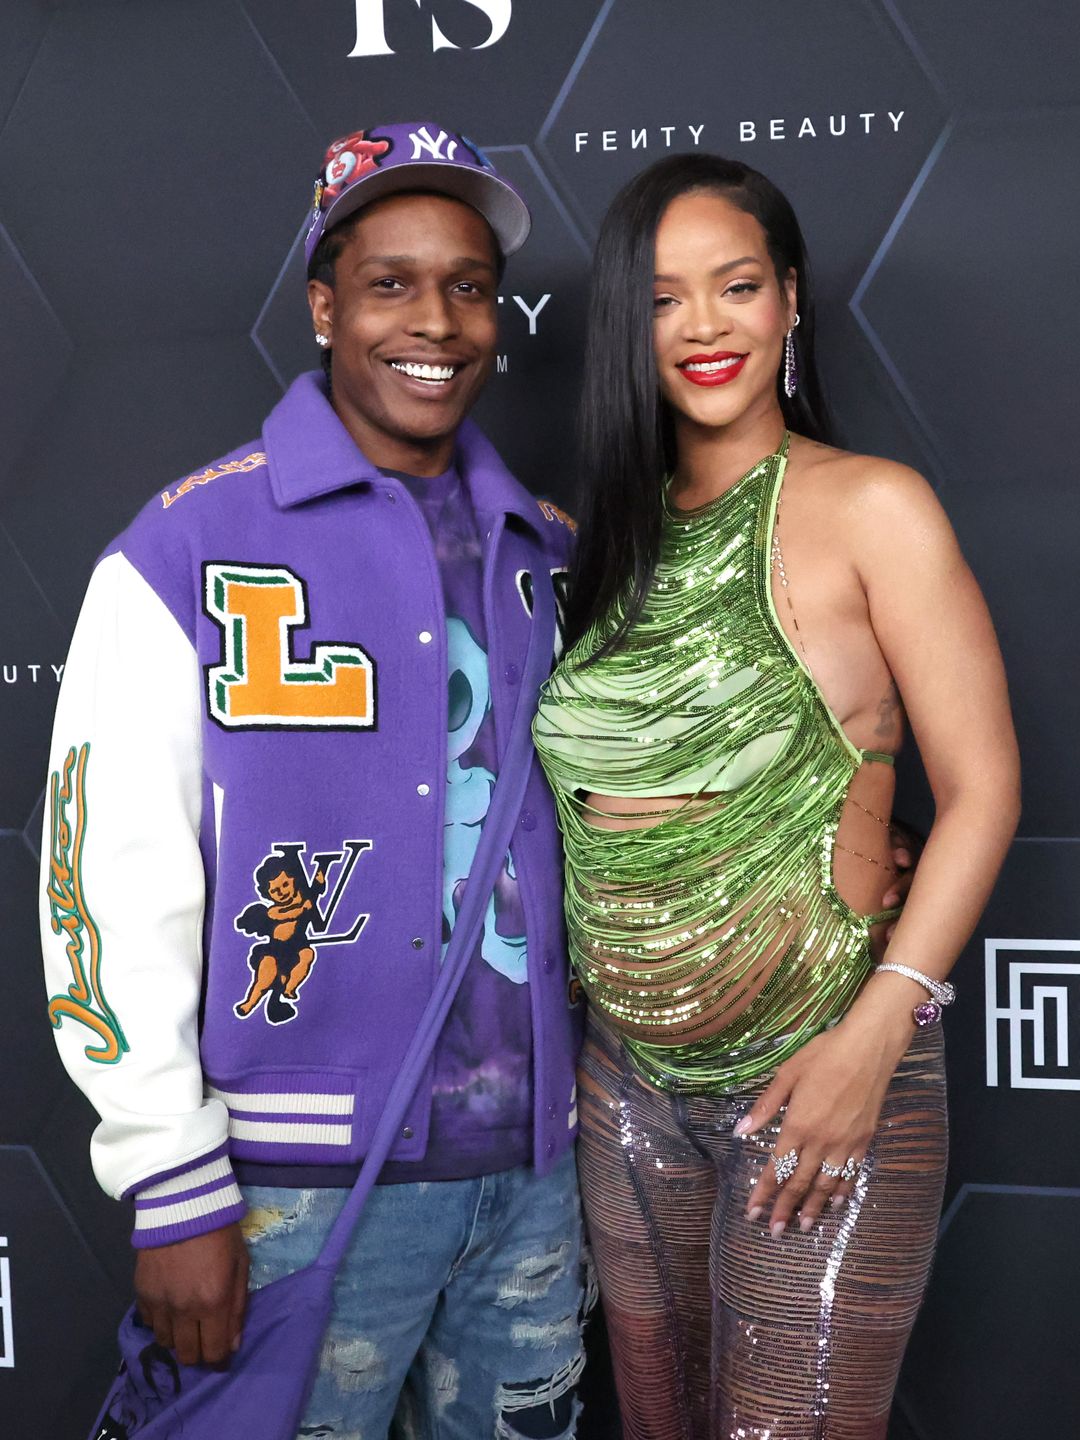 Rihanna and ASAP Rocky smiling on a red carpet, she is visibly pregnant